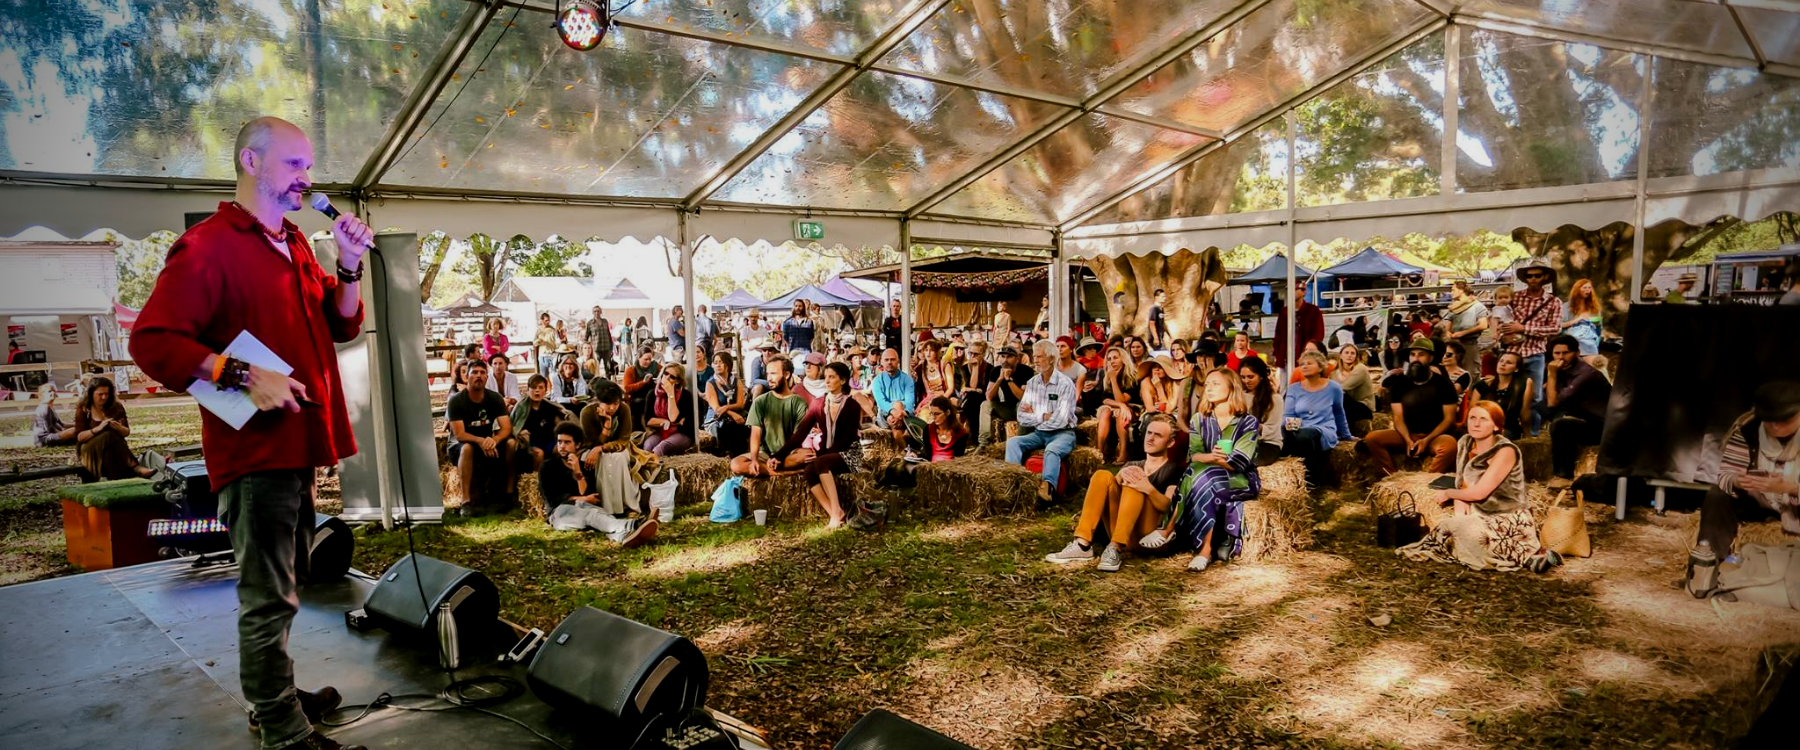 Over 70 awesome speakers and workshop presenters were featured at Renew Fest 2021